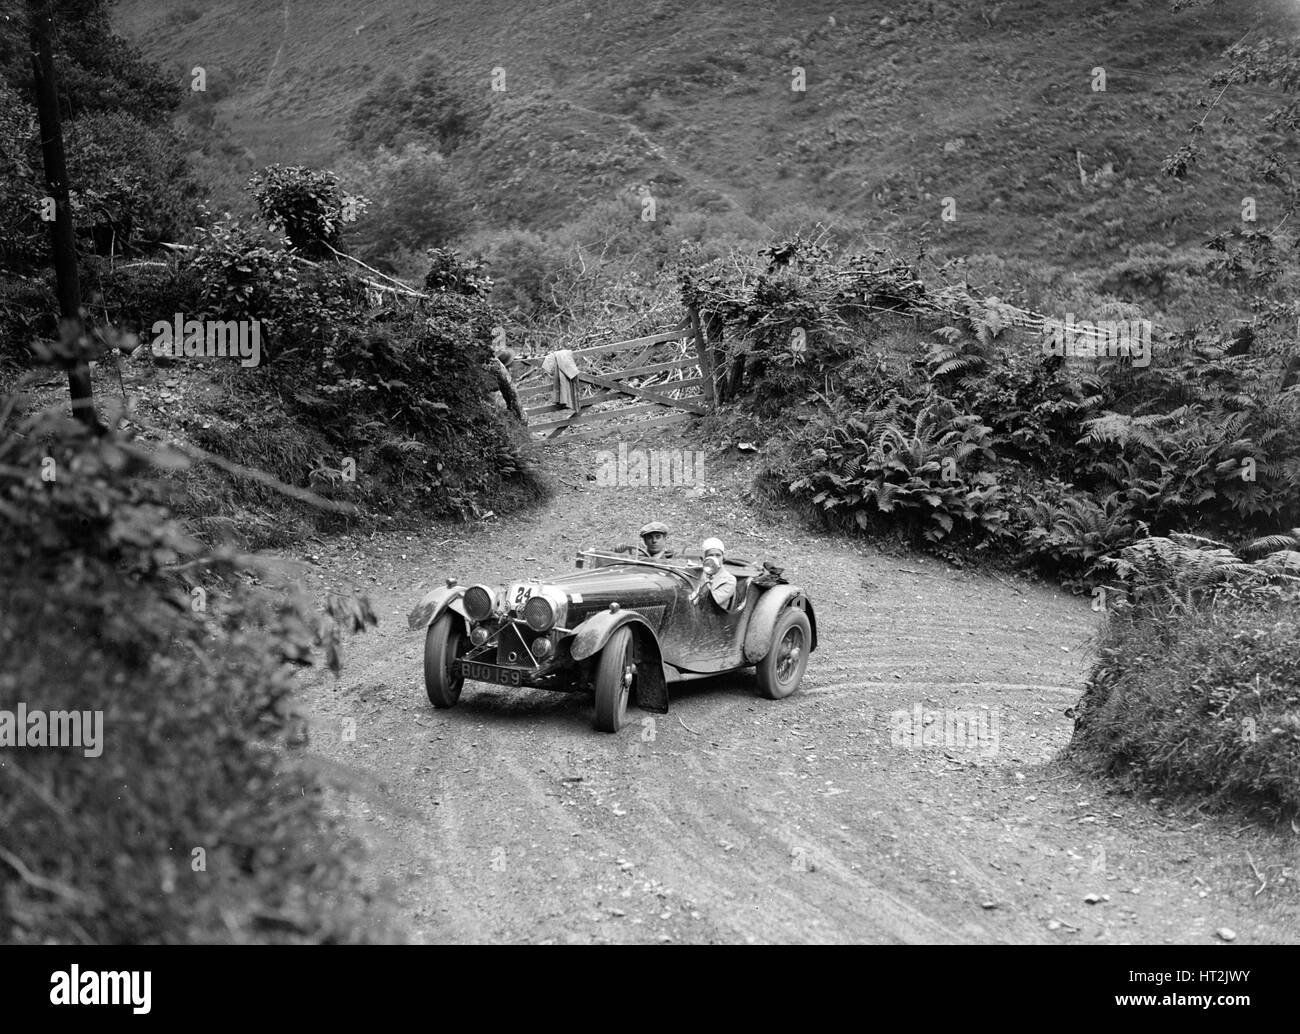 1935 Jaguar SS 90 2-seater taking part in a motoring trial, late 1930s. Artist: Bill Brunell. Stock Photo